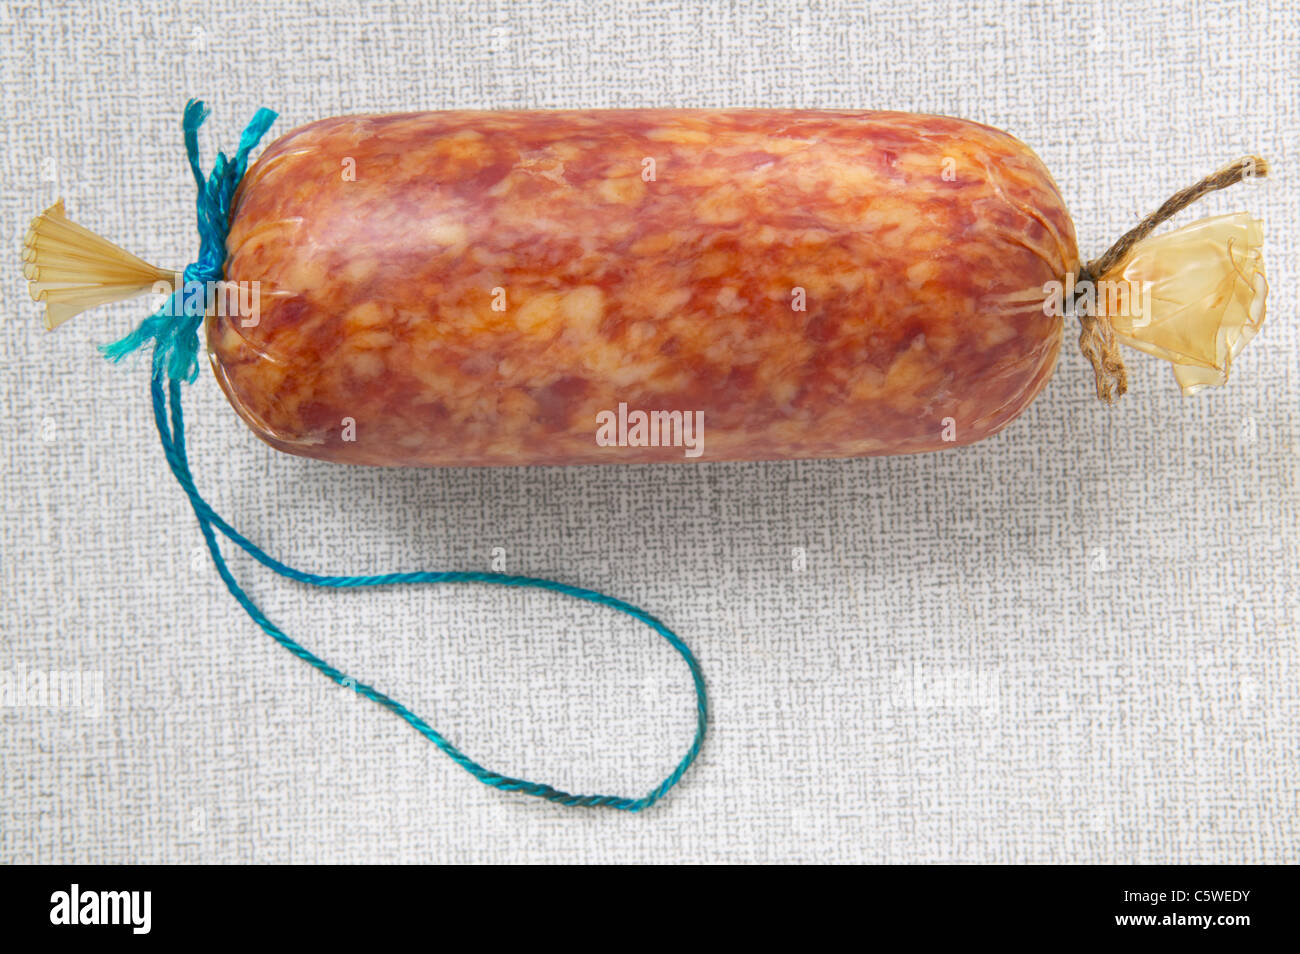 Mettwurst sausage, elevated view Stock Photo